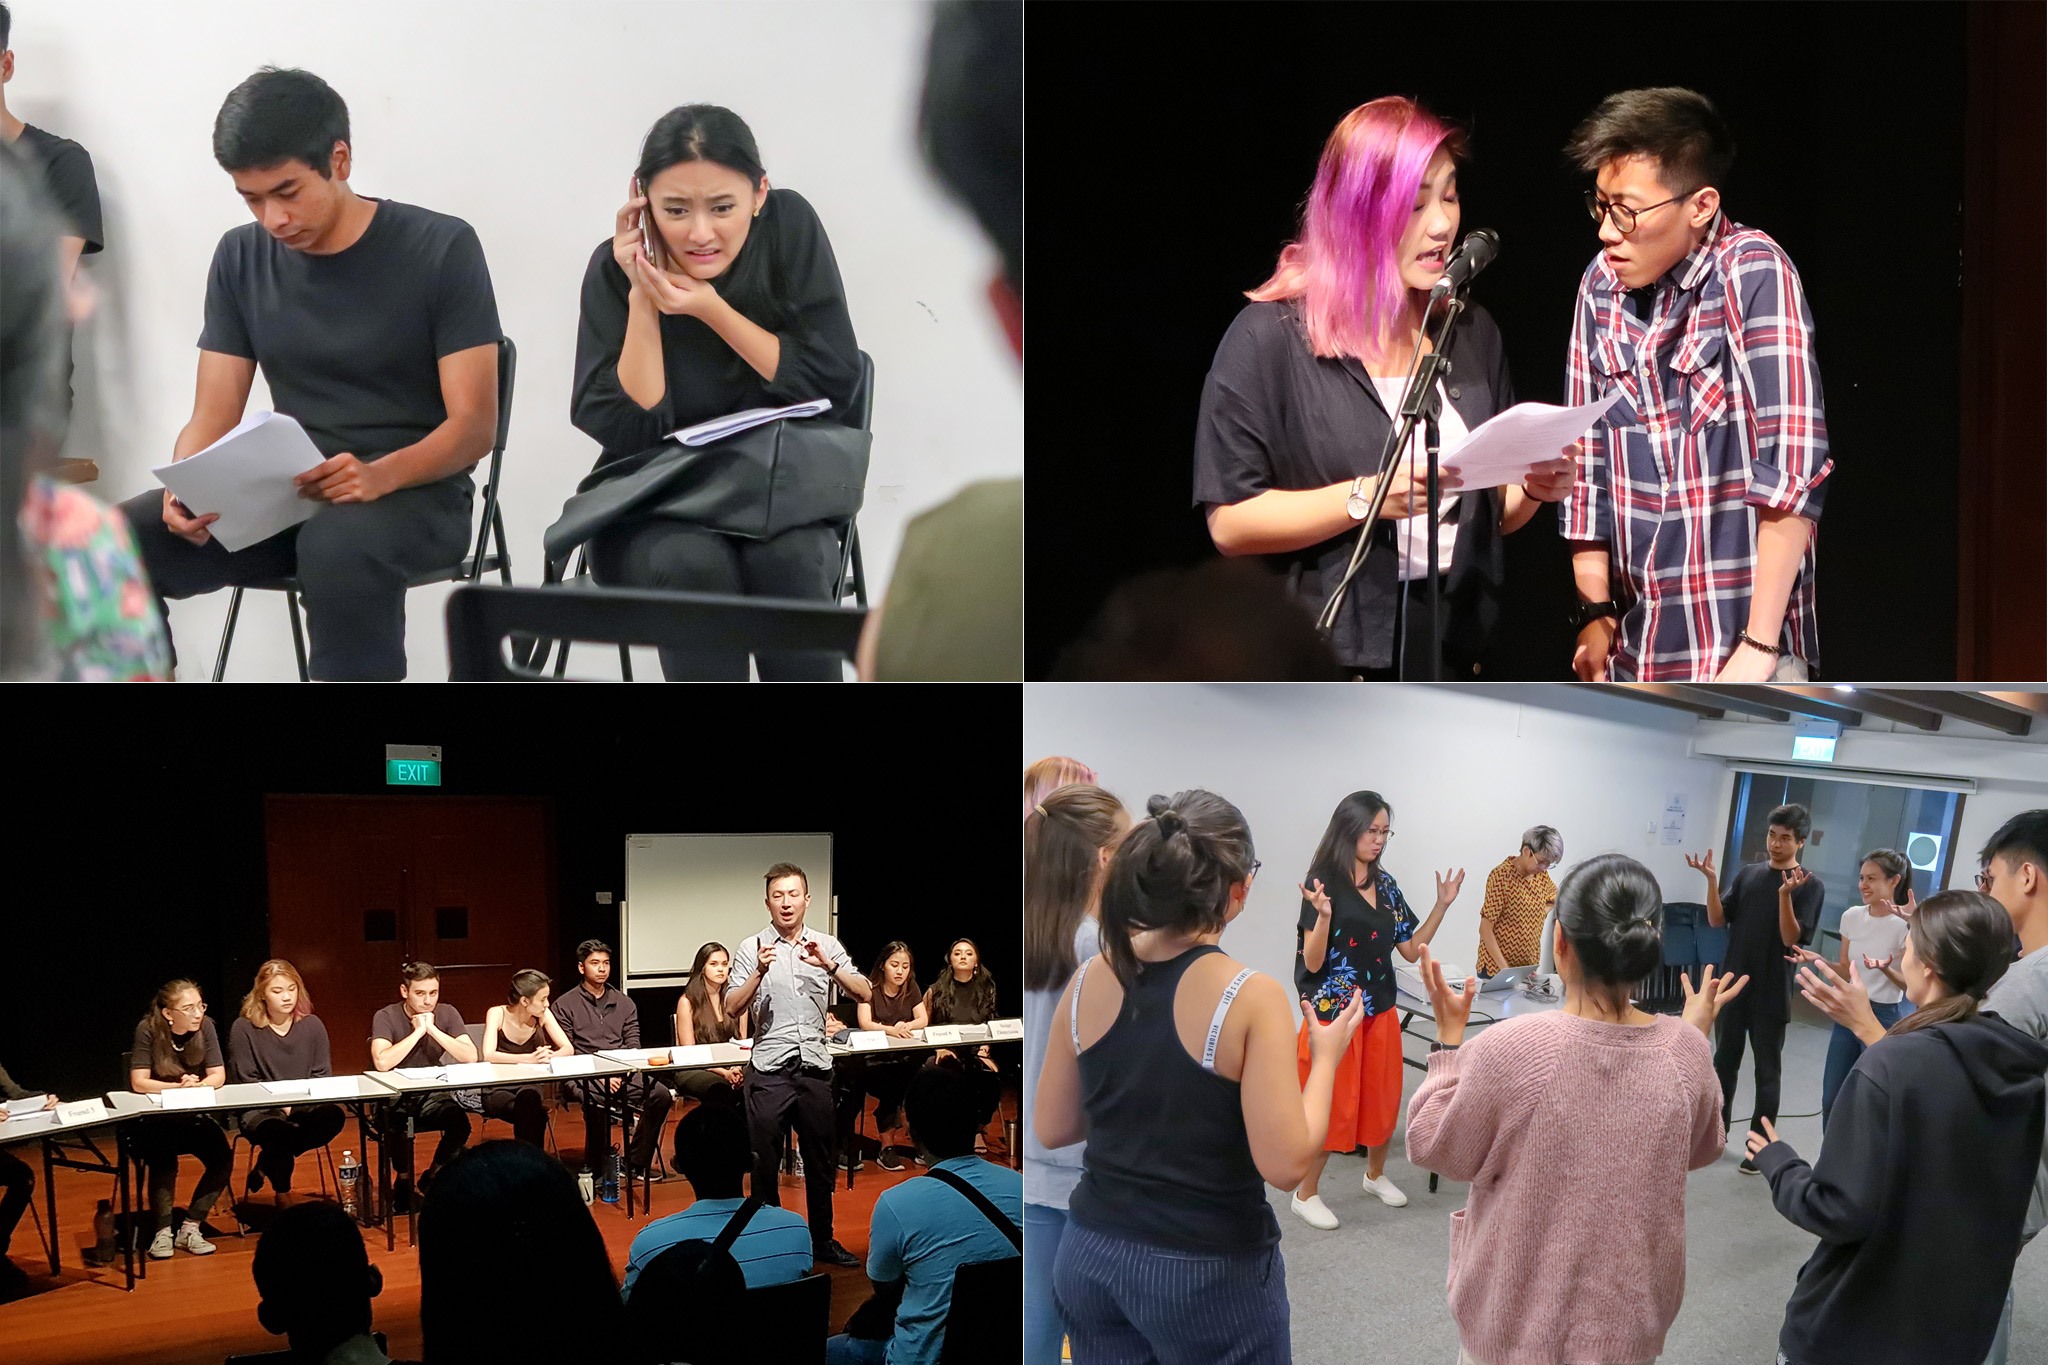 A collage of 4 photographs of showing groups of people in activity. Clockwise from top left: 2 pairs of actors on stage in conversation; a group of people standing in a circle midway through a hand gesturing movement; a row of actors sitting at a long table on stage in a script reading session.